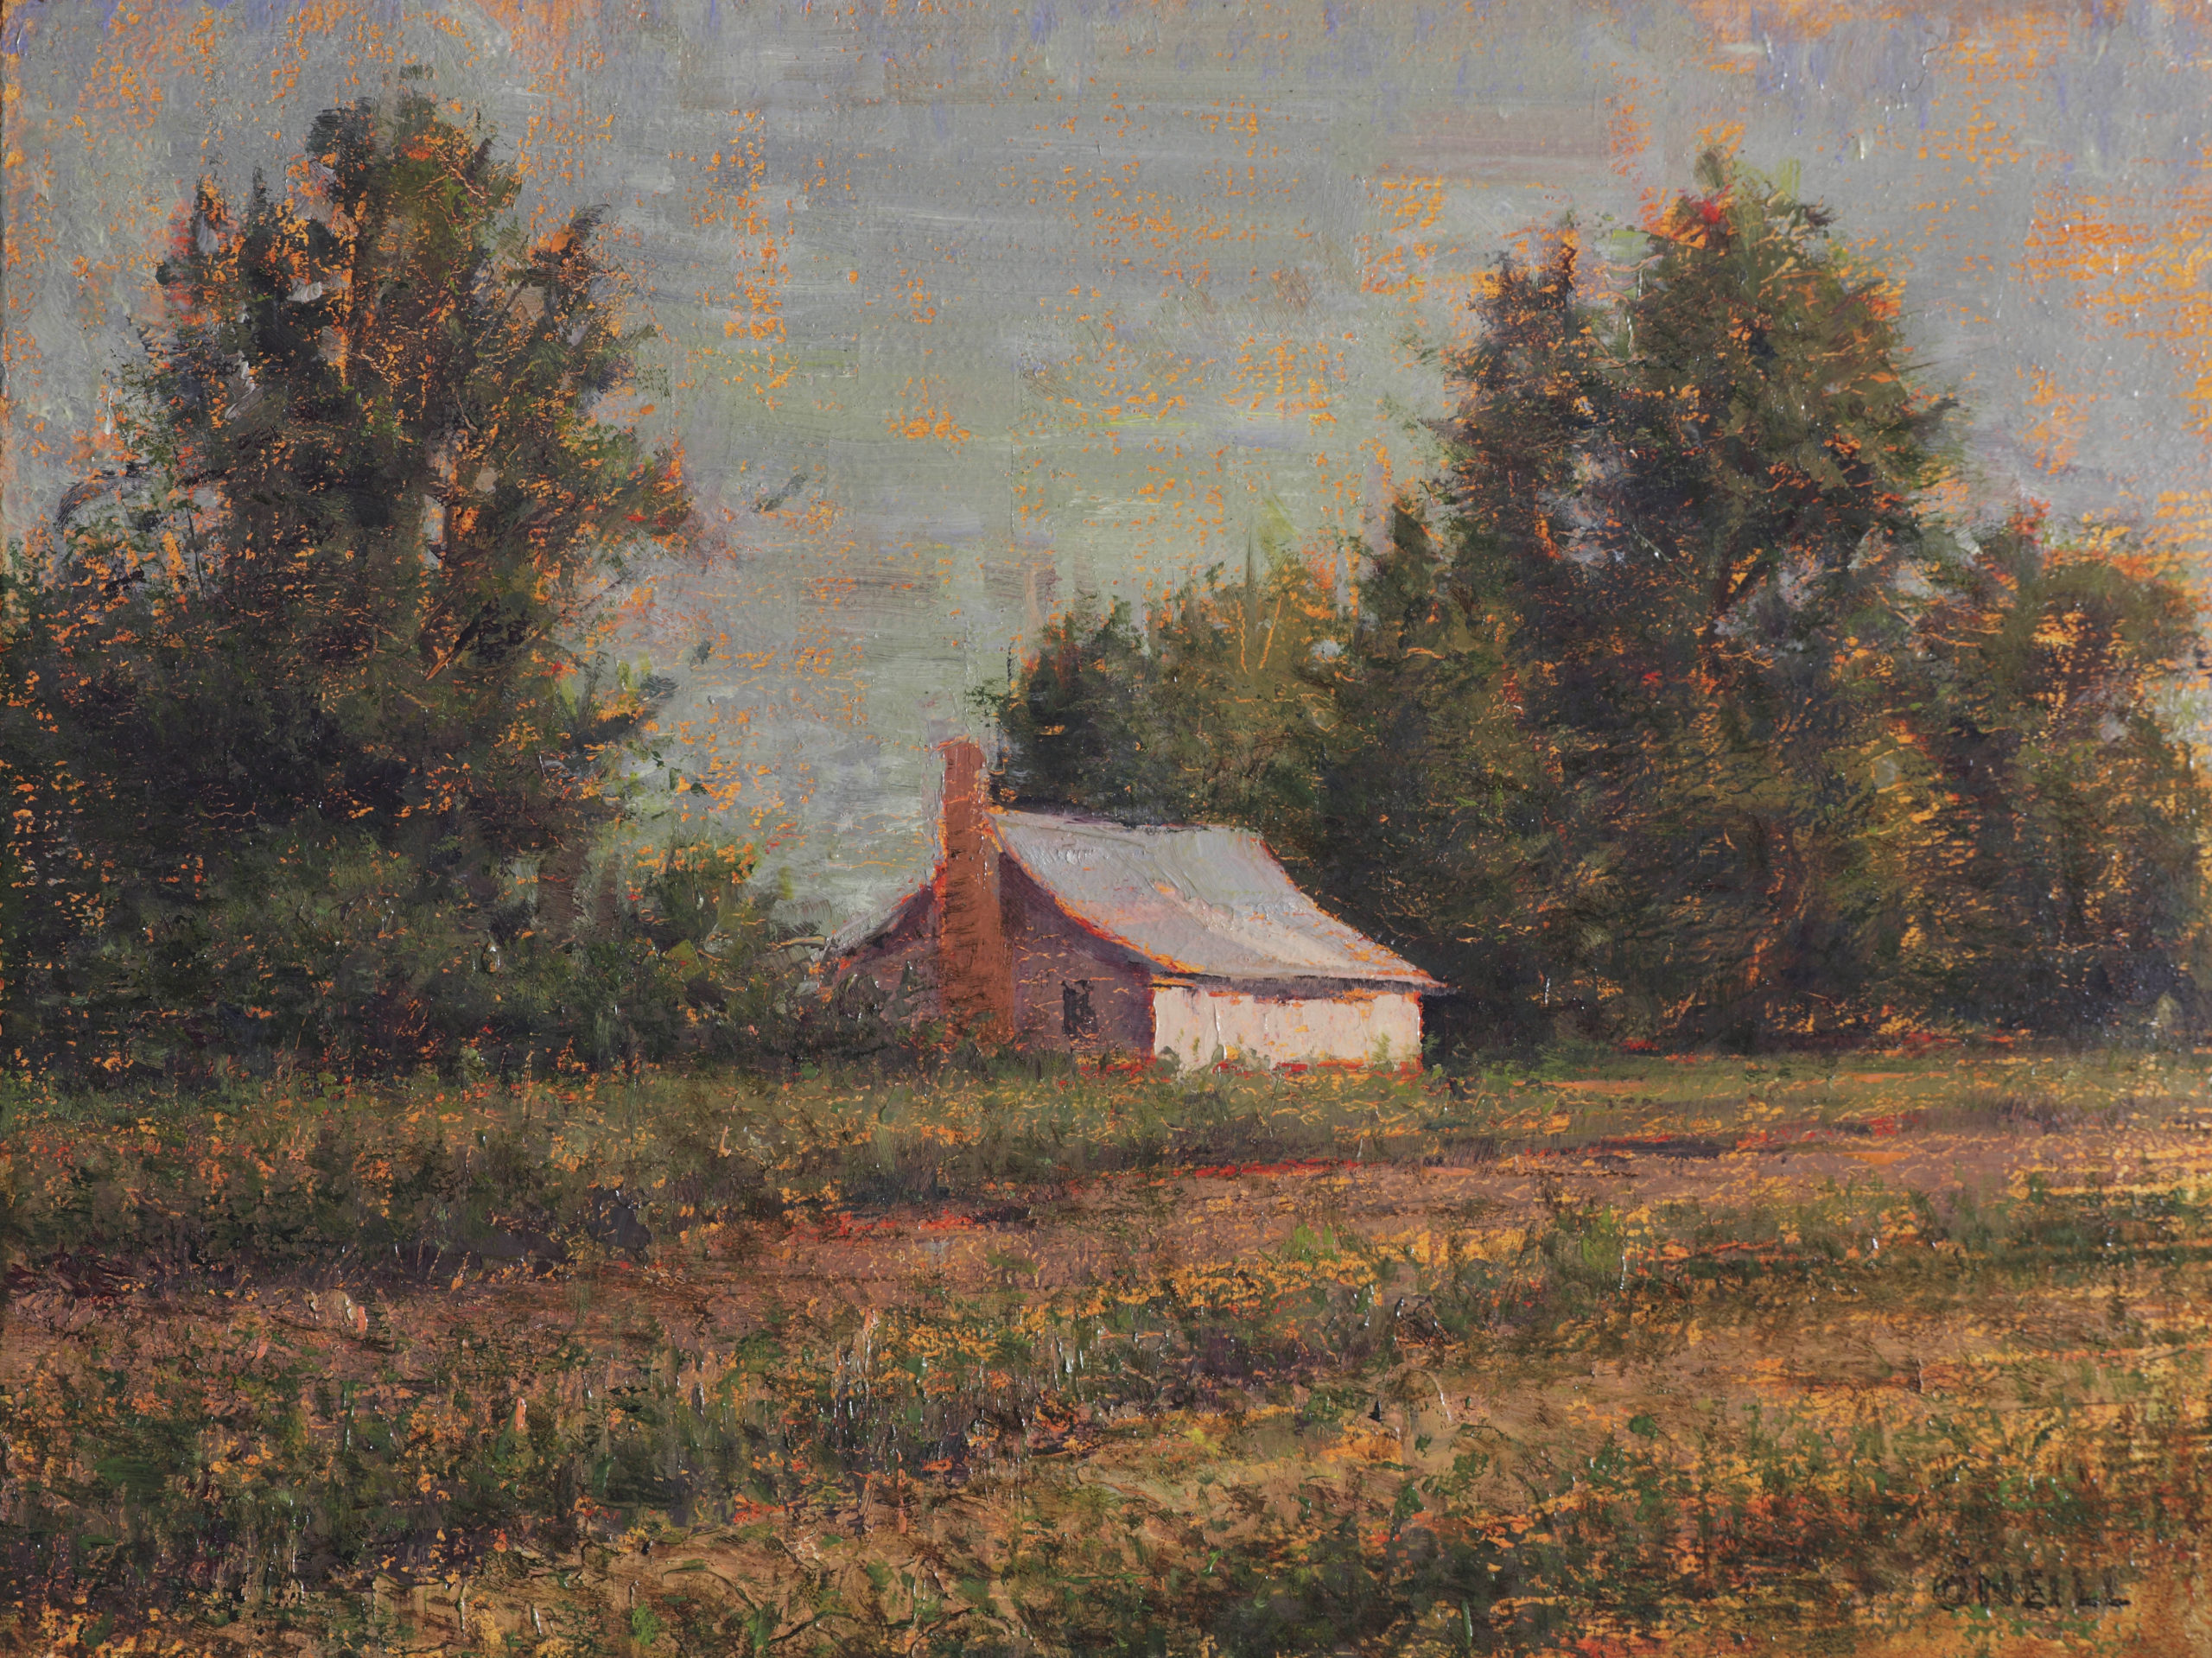 Docs’ Place by Gerry O’Neill, oil on panel, 9×12 at Craven Allen Gallery